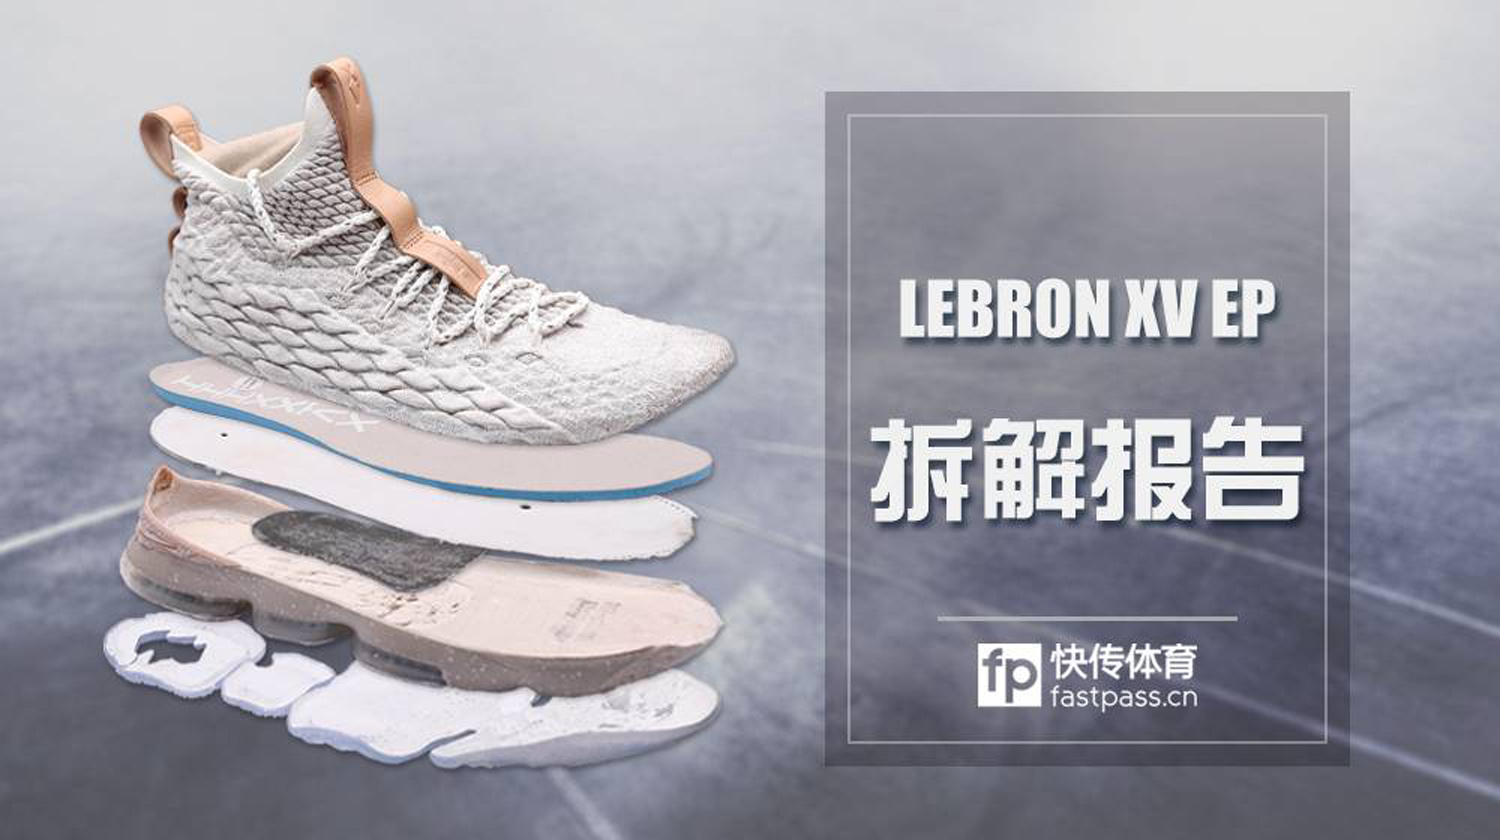 The Nike Lebron 15 Deconstructed - Weartesters